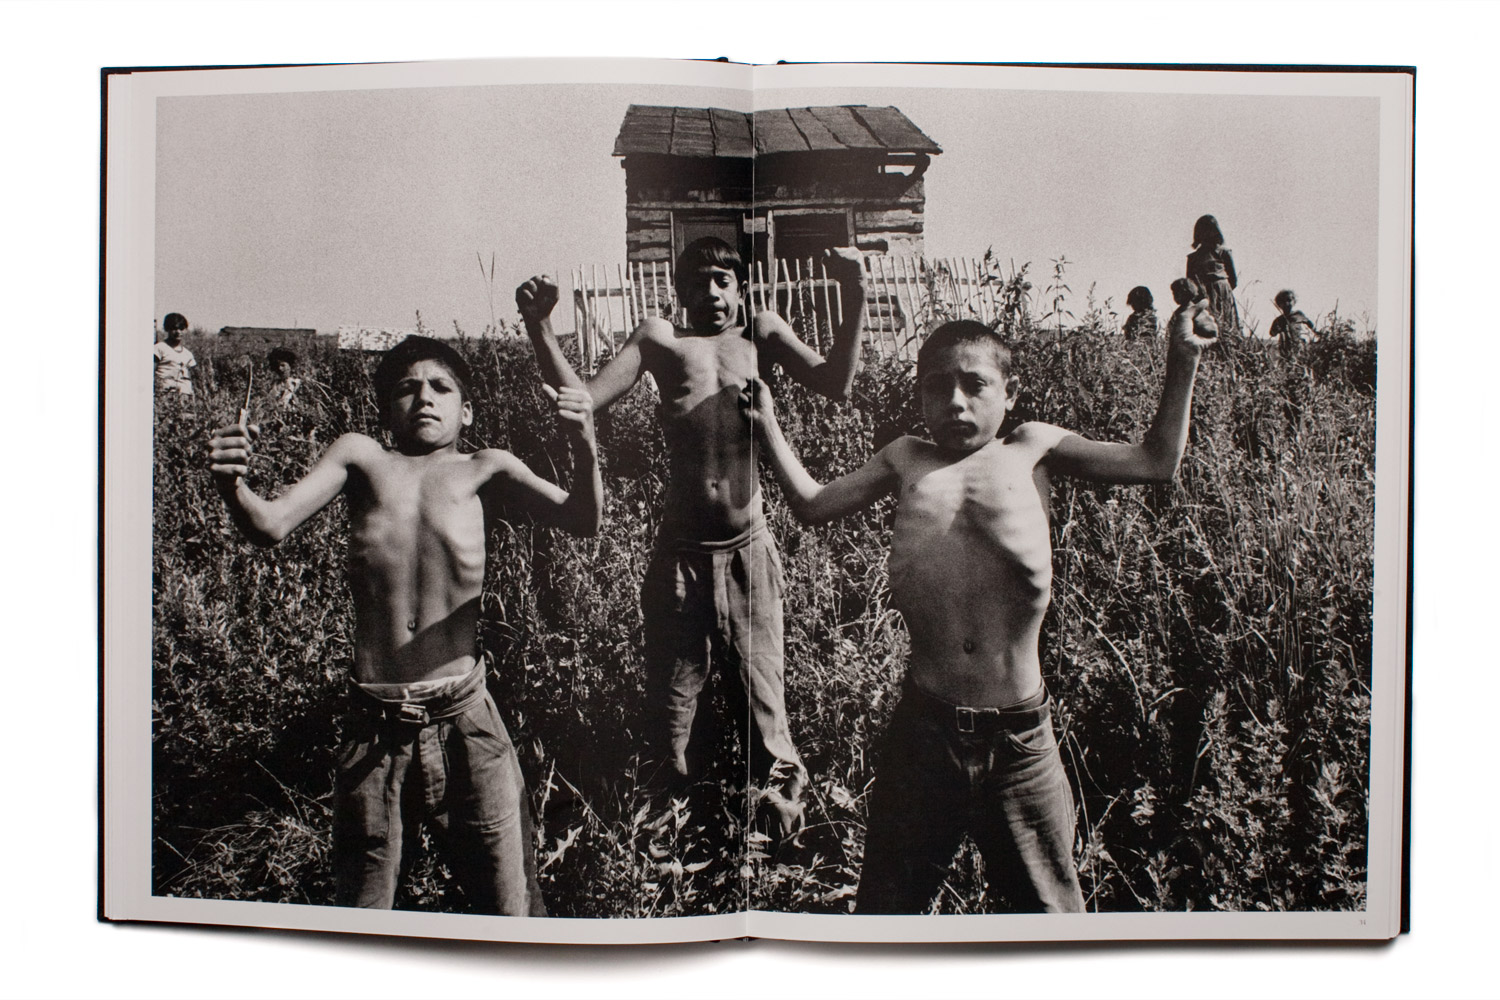 The revised and enlarged edition includes 109 images and uses the photographer’s original book maquette Cikani (Czech for Gypsies) as its foundation.